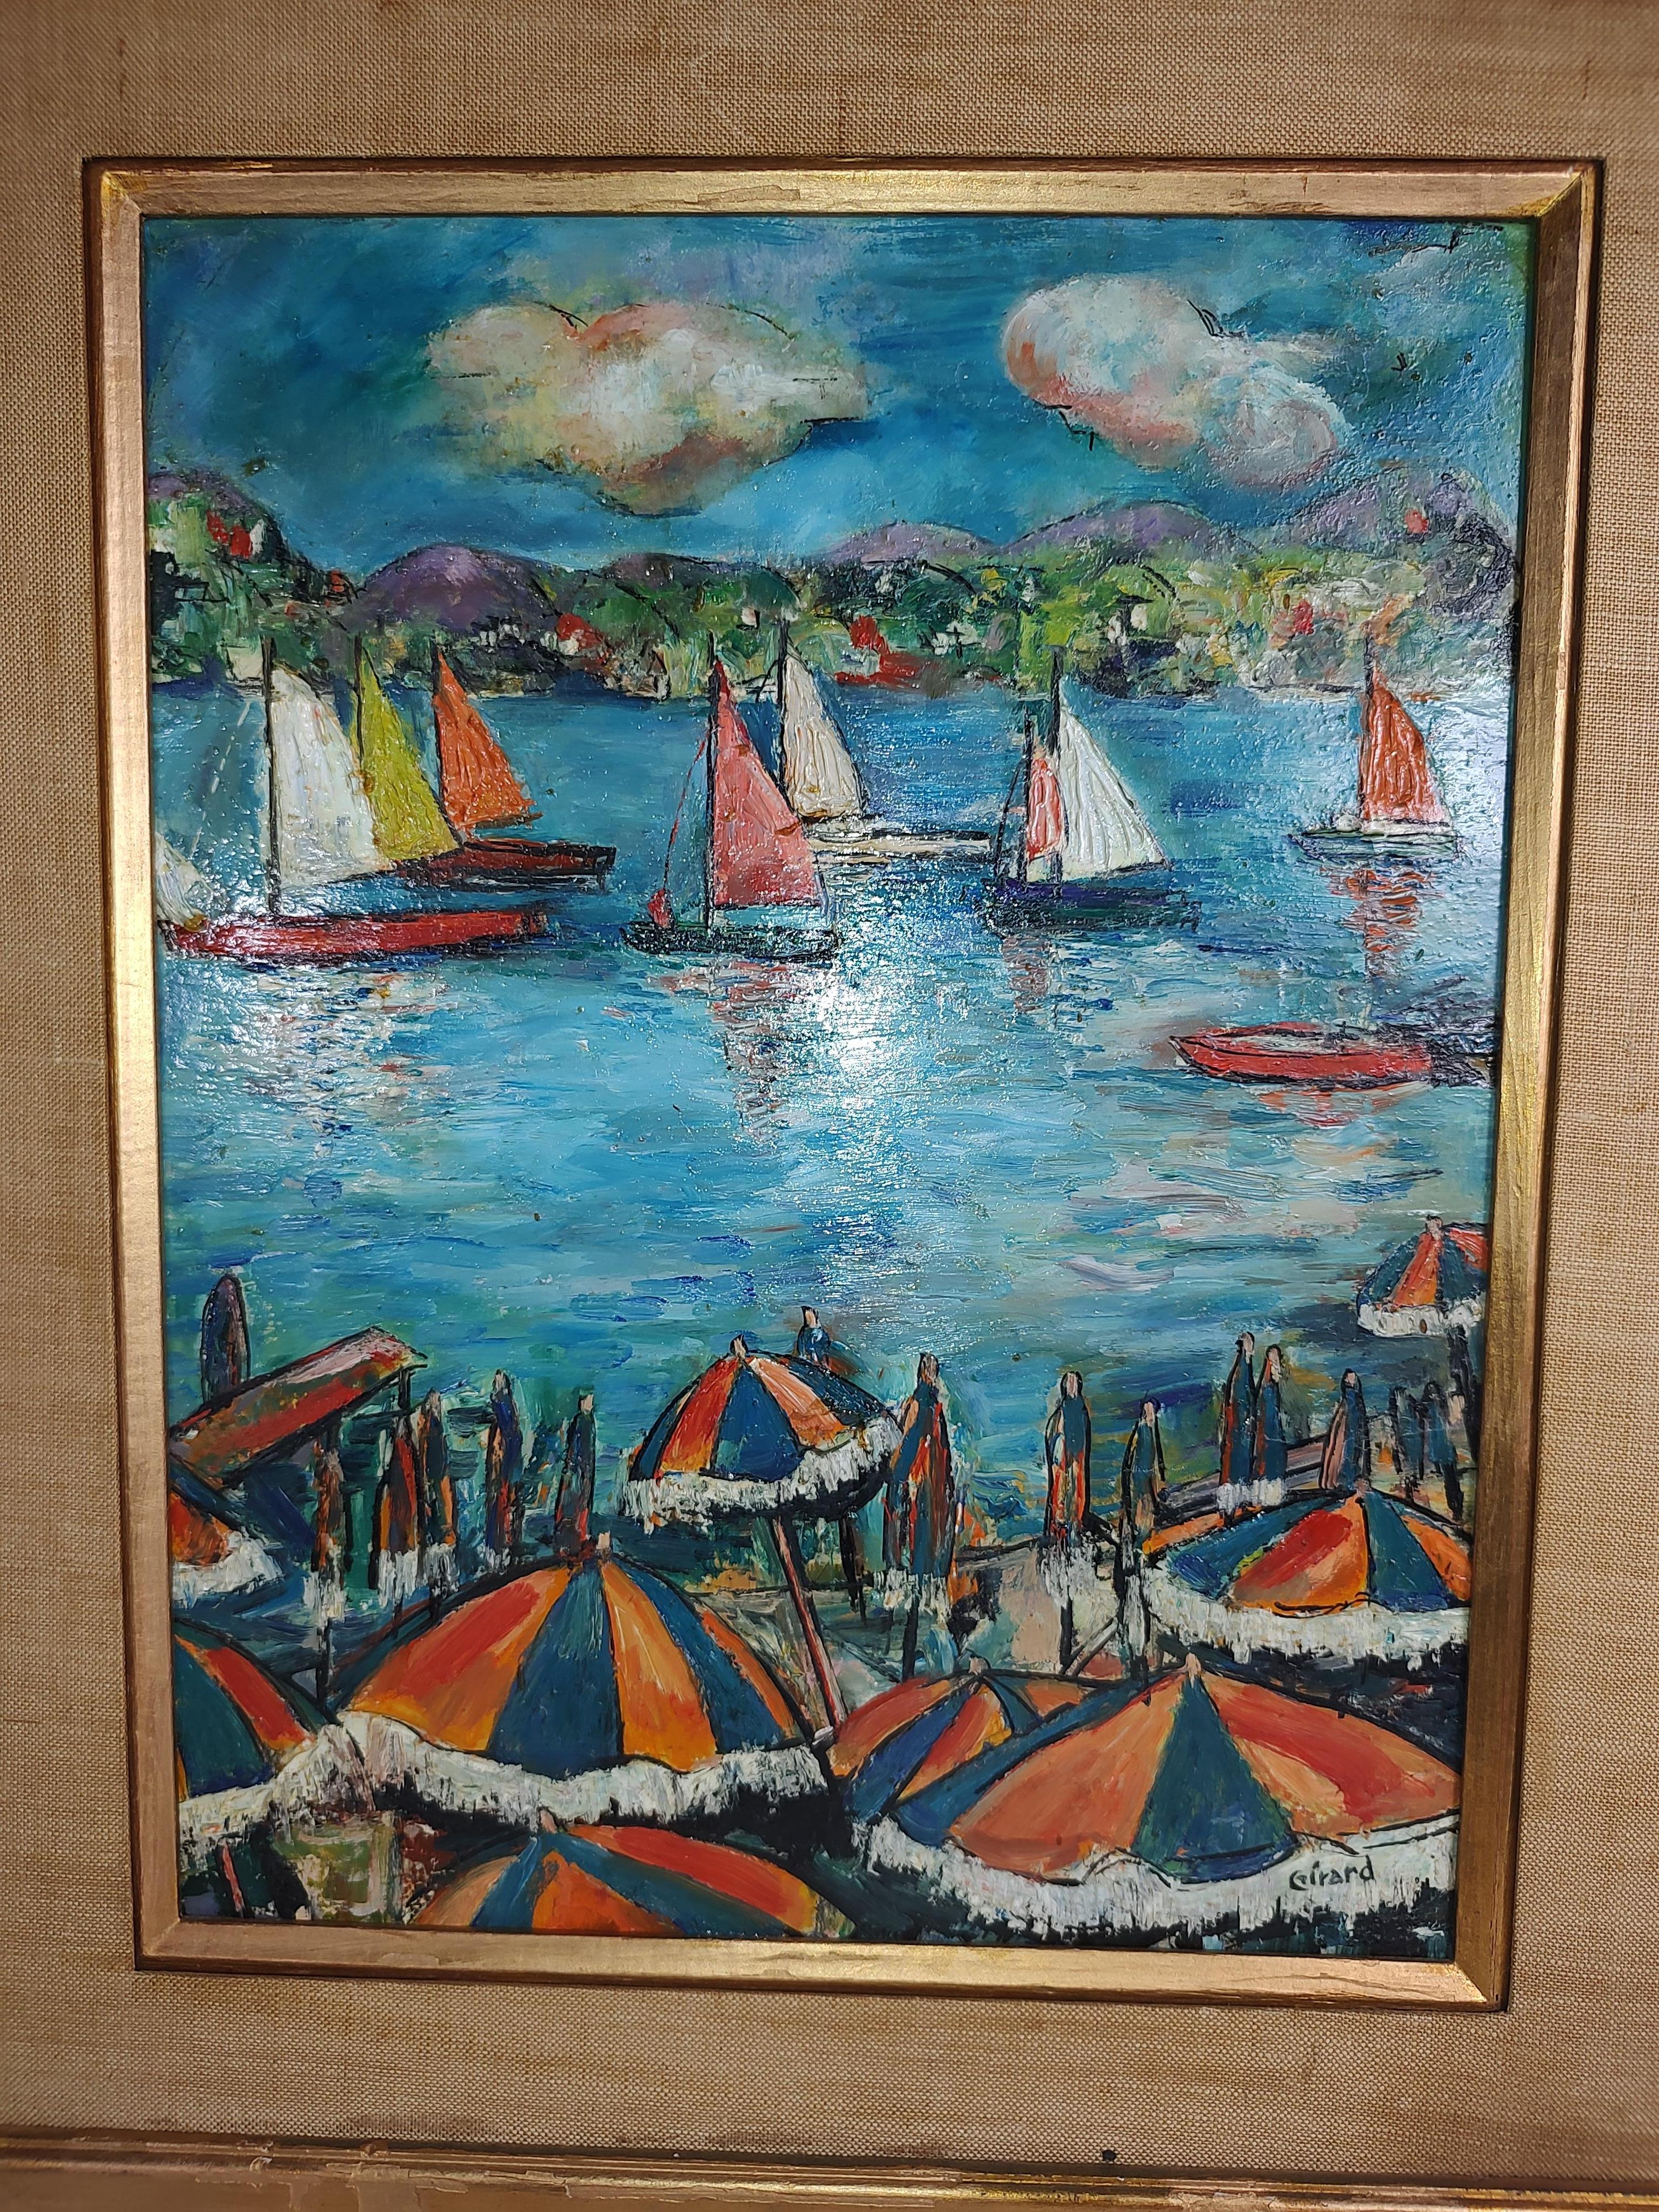 Hardwood Mid-Century Modern Impressionist Painting of the Riviera by S. Girard C1955 For Sale